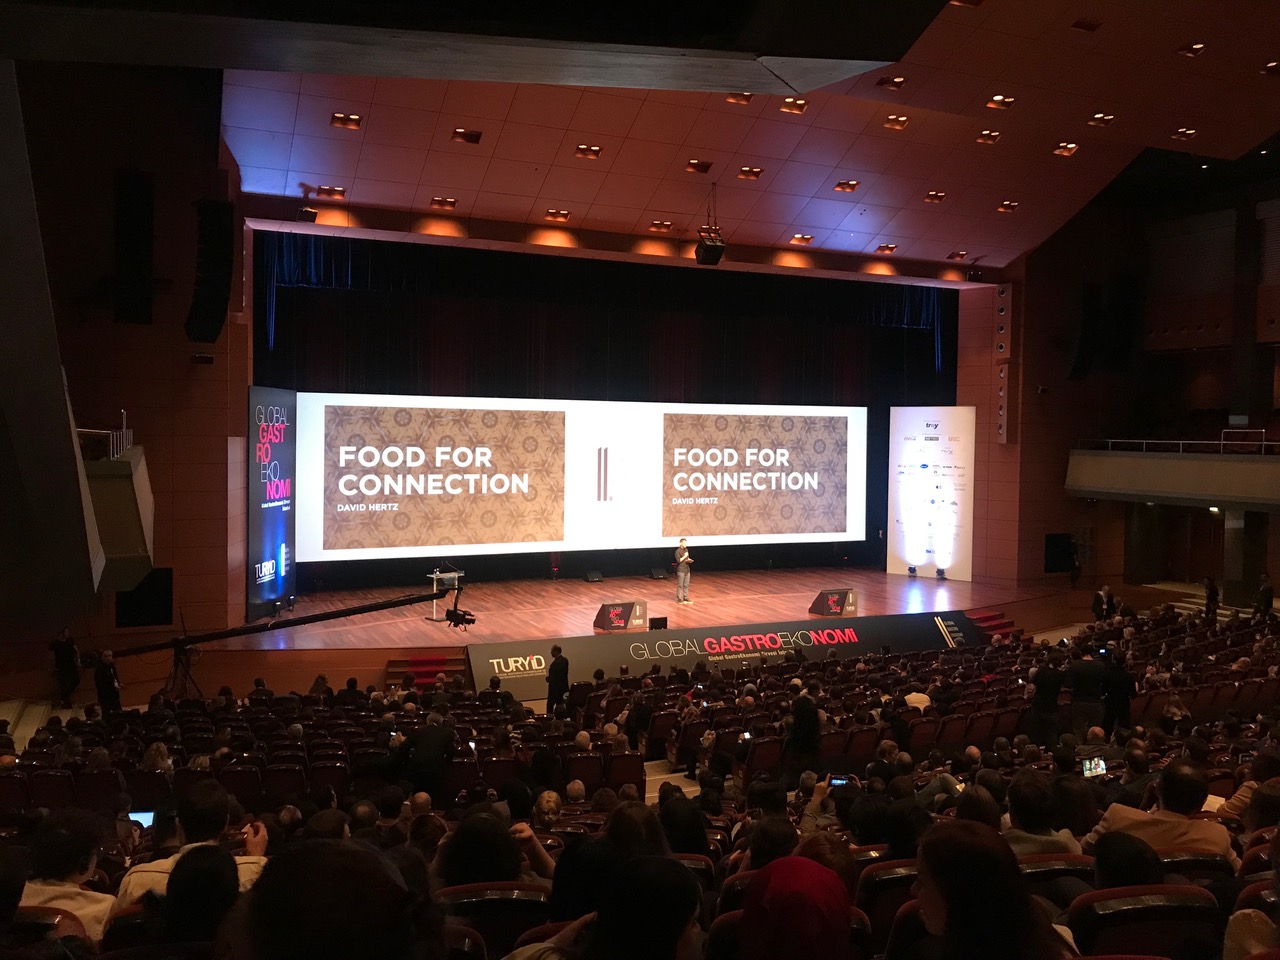 Inoksan became a sponsor for the 2. Global Gastroeconomy Summit